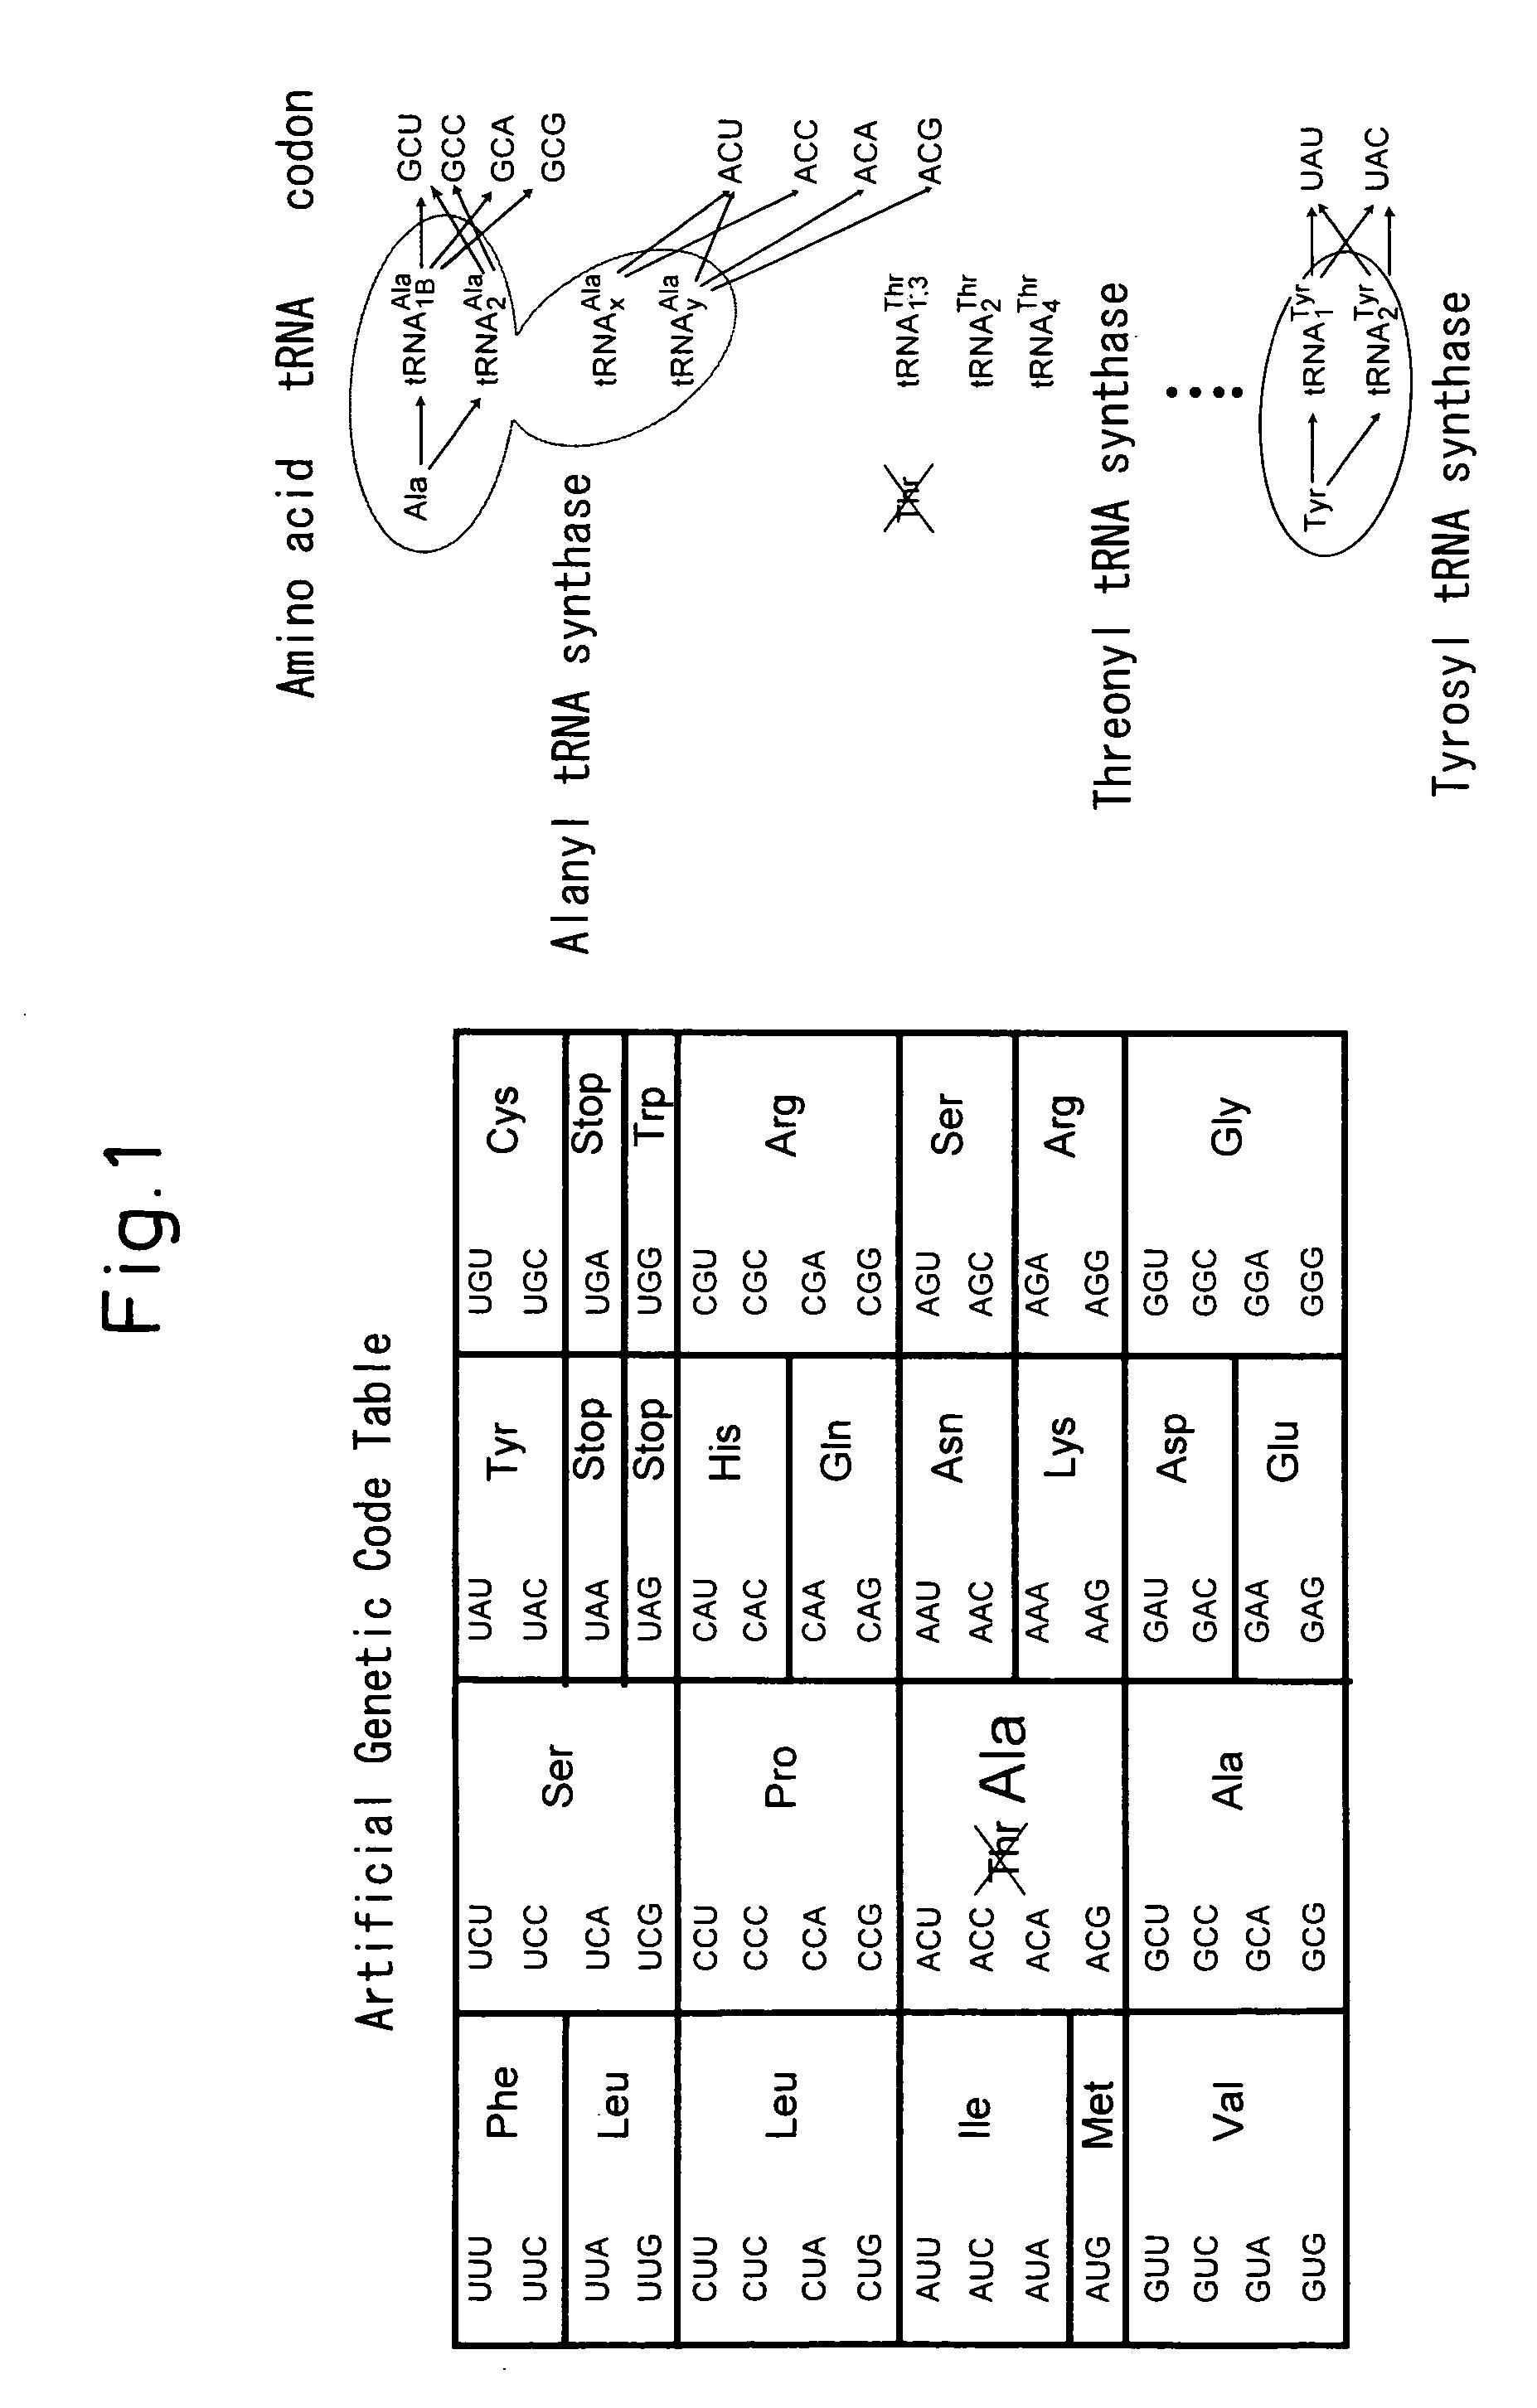 Process for producing functional non-naturally occurring proteins, and method for site-specific modification and immobilization of the proteins